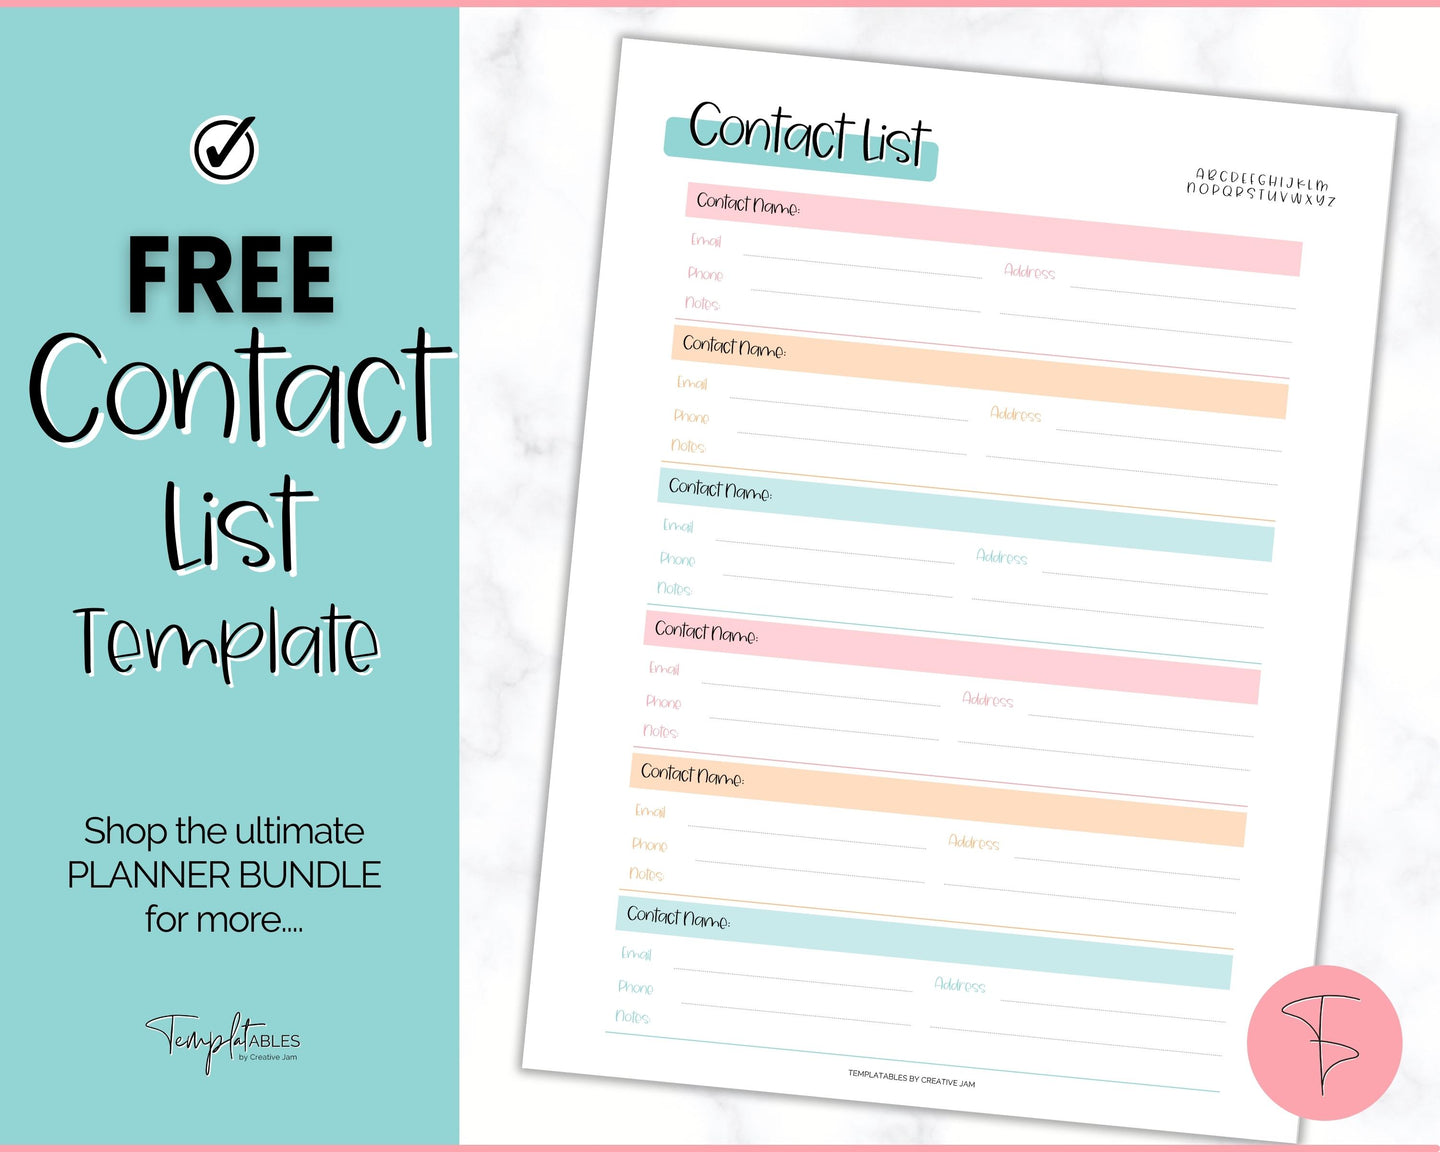 FREE - Contact List Printable Template, Address Book, Contact Log | Colorful Sky